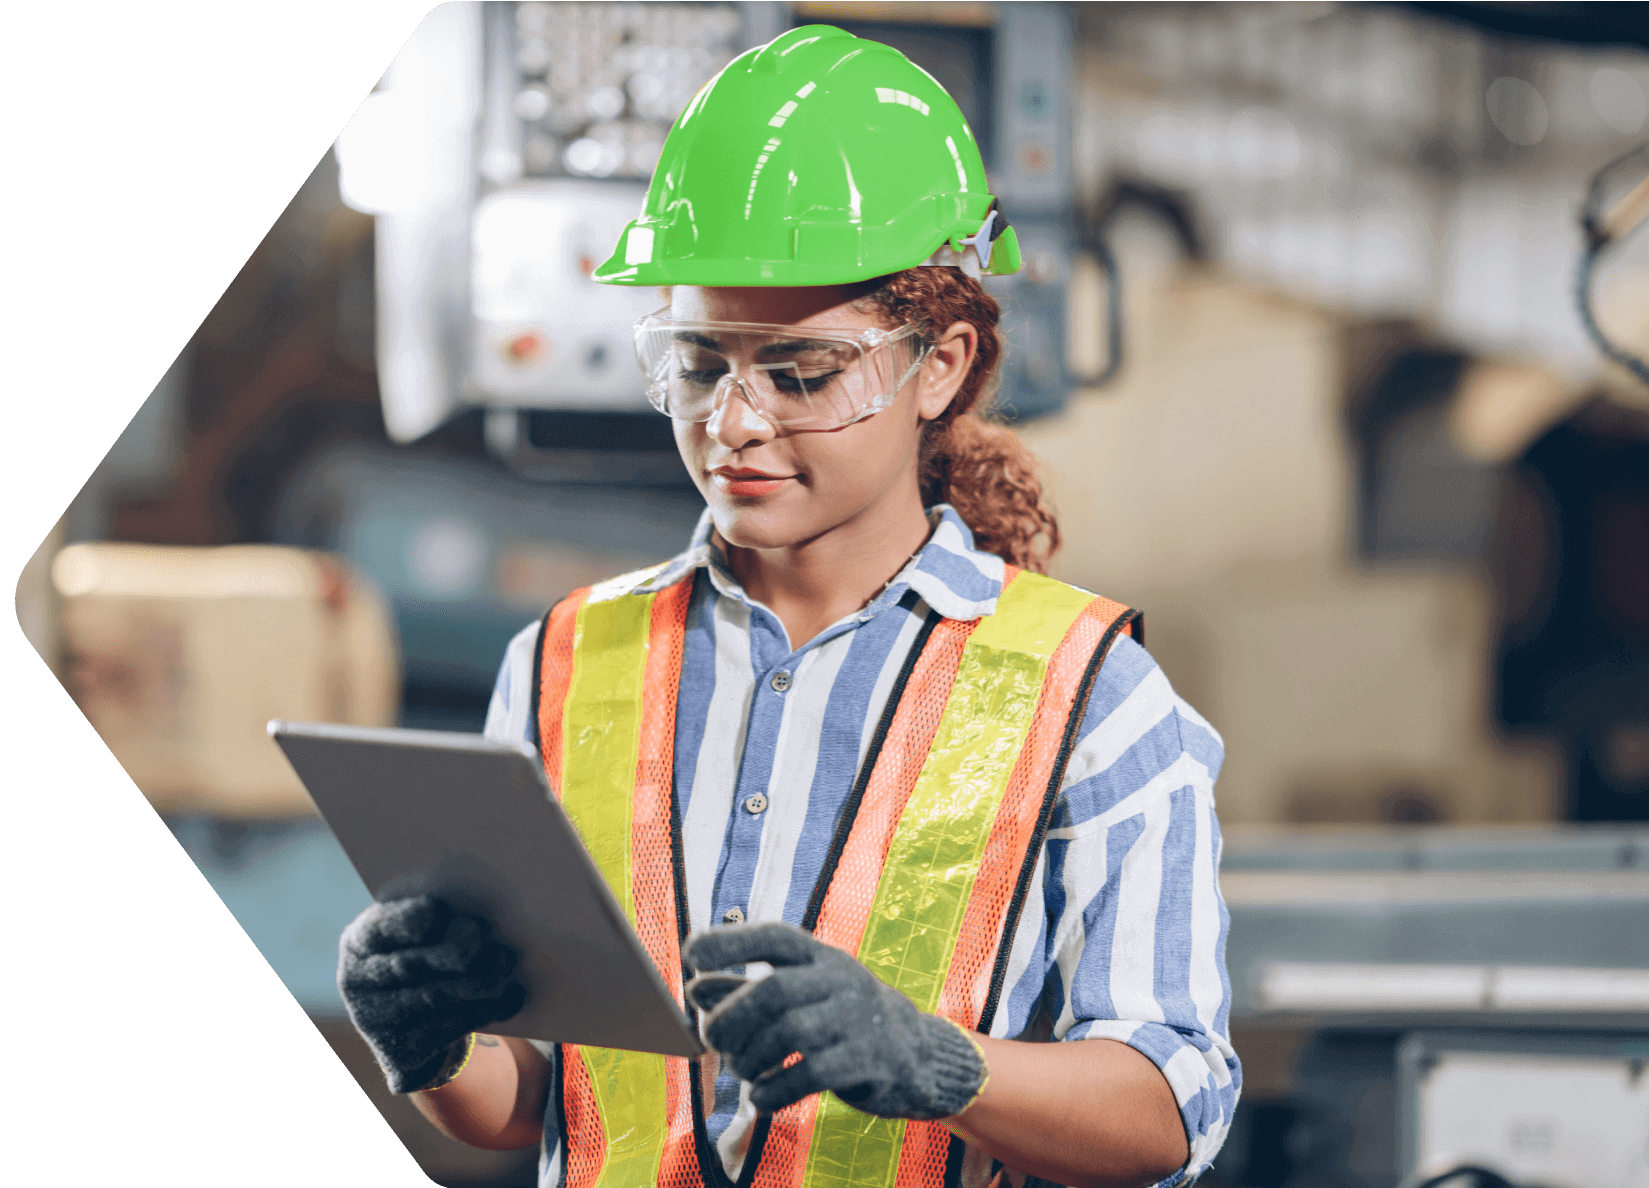 photo of a woman in a green hard hat and holding a tablet